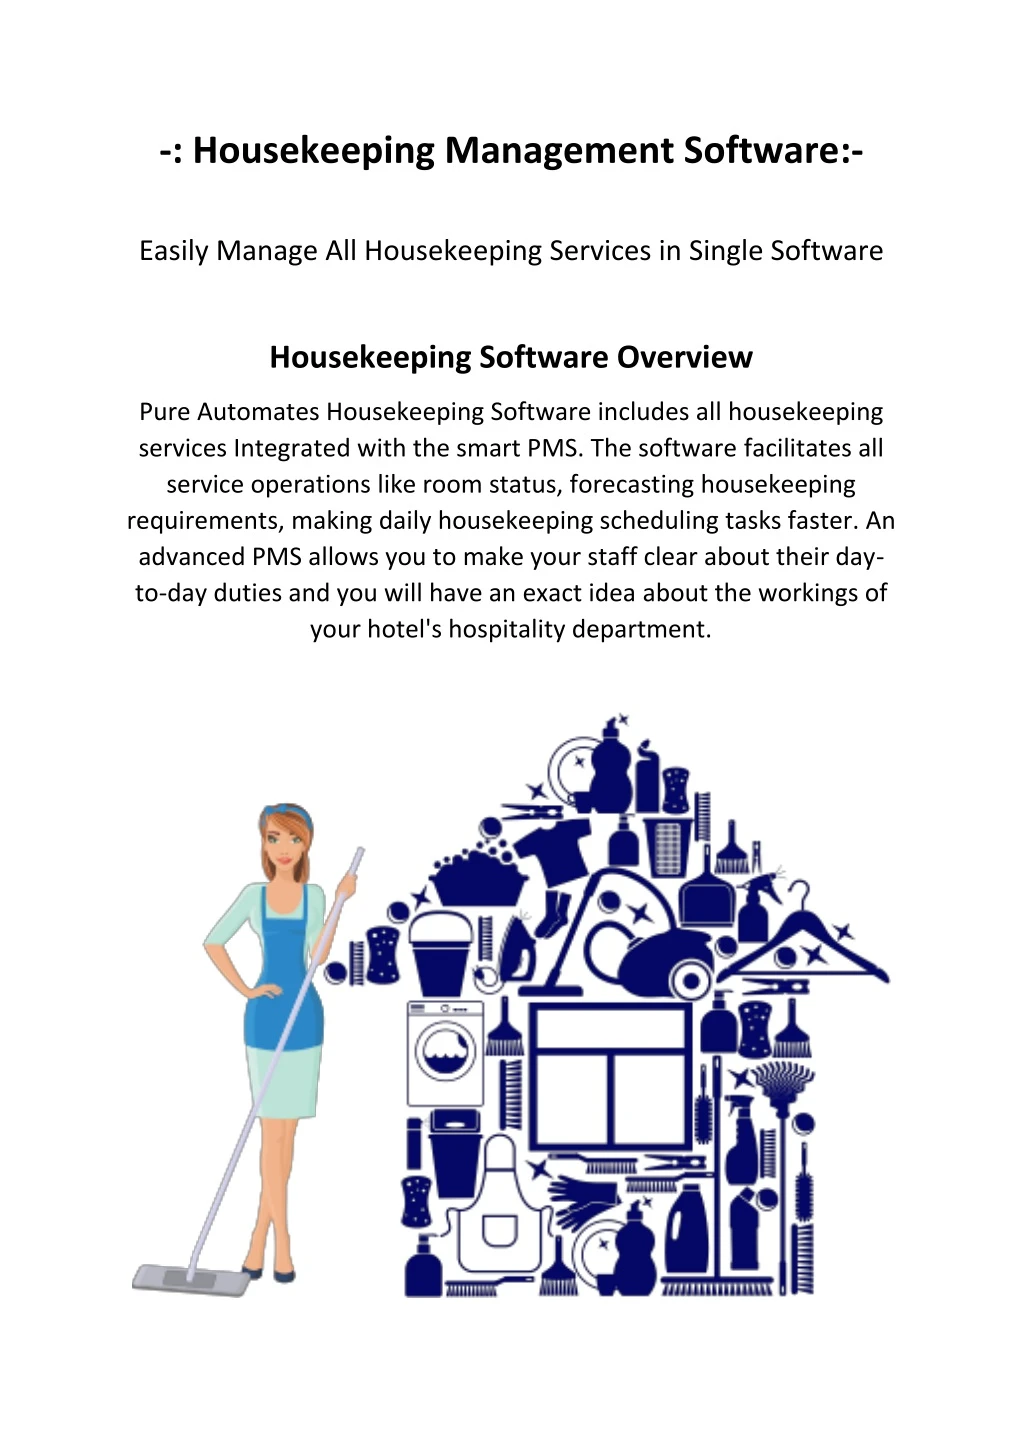 housekeeping management software